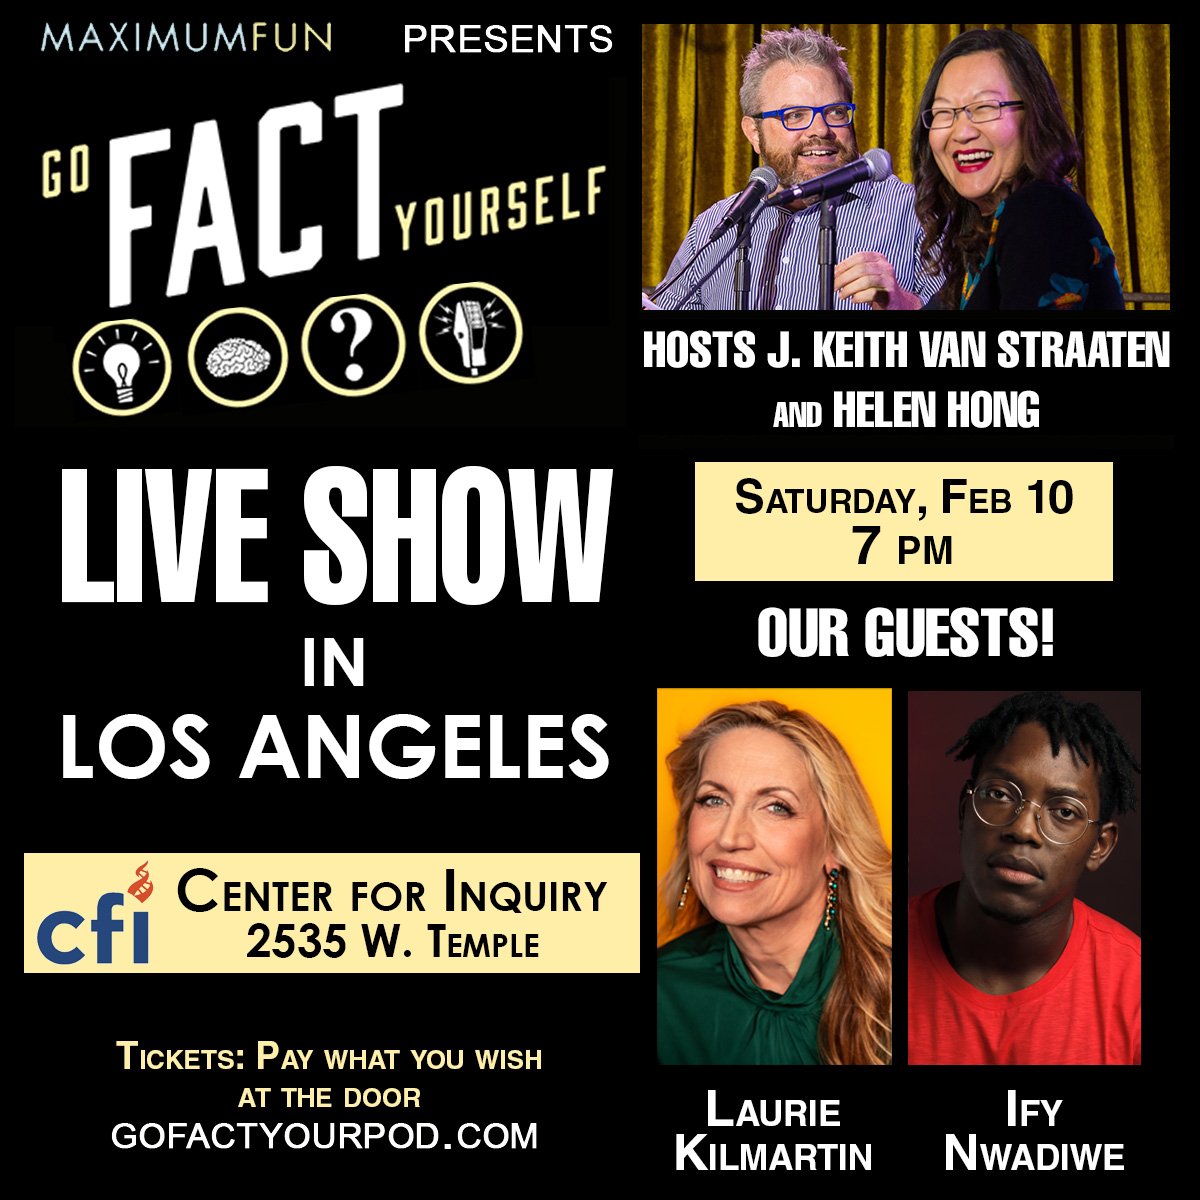 Let's do this, LA! @anylaurie16 & @IfyNwadiwe compete in trivia about topics they love! @funnyhelenhong & @J_Keith host! Surprise experts join! See you there! @center4inquiry @maxfunhq